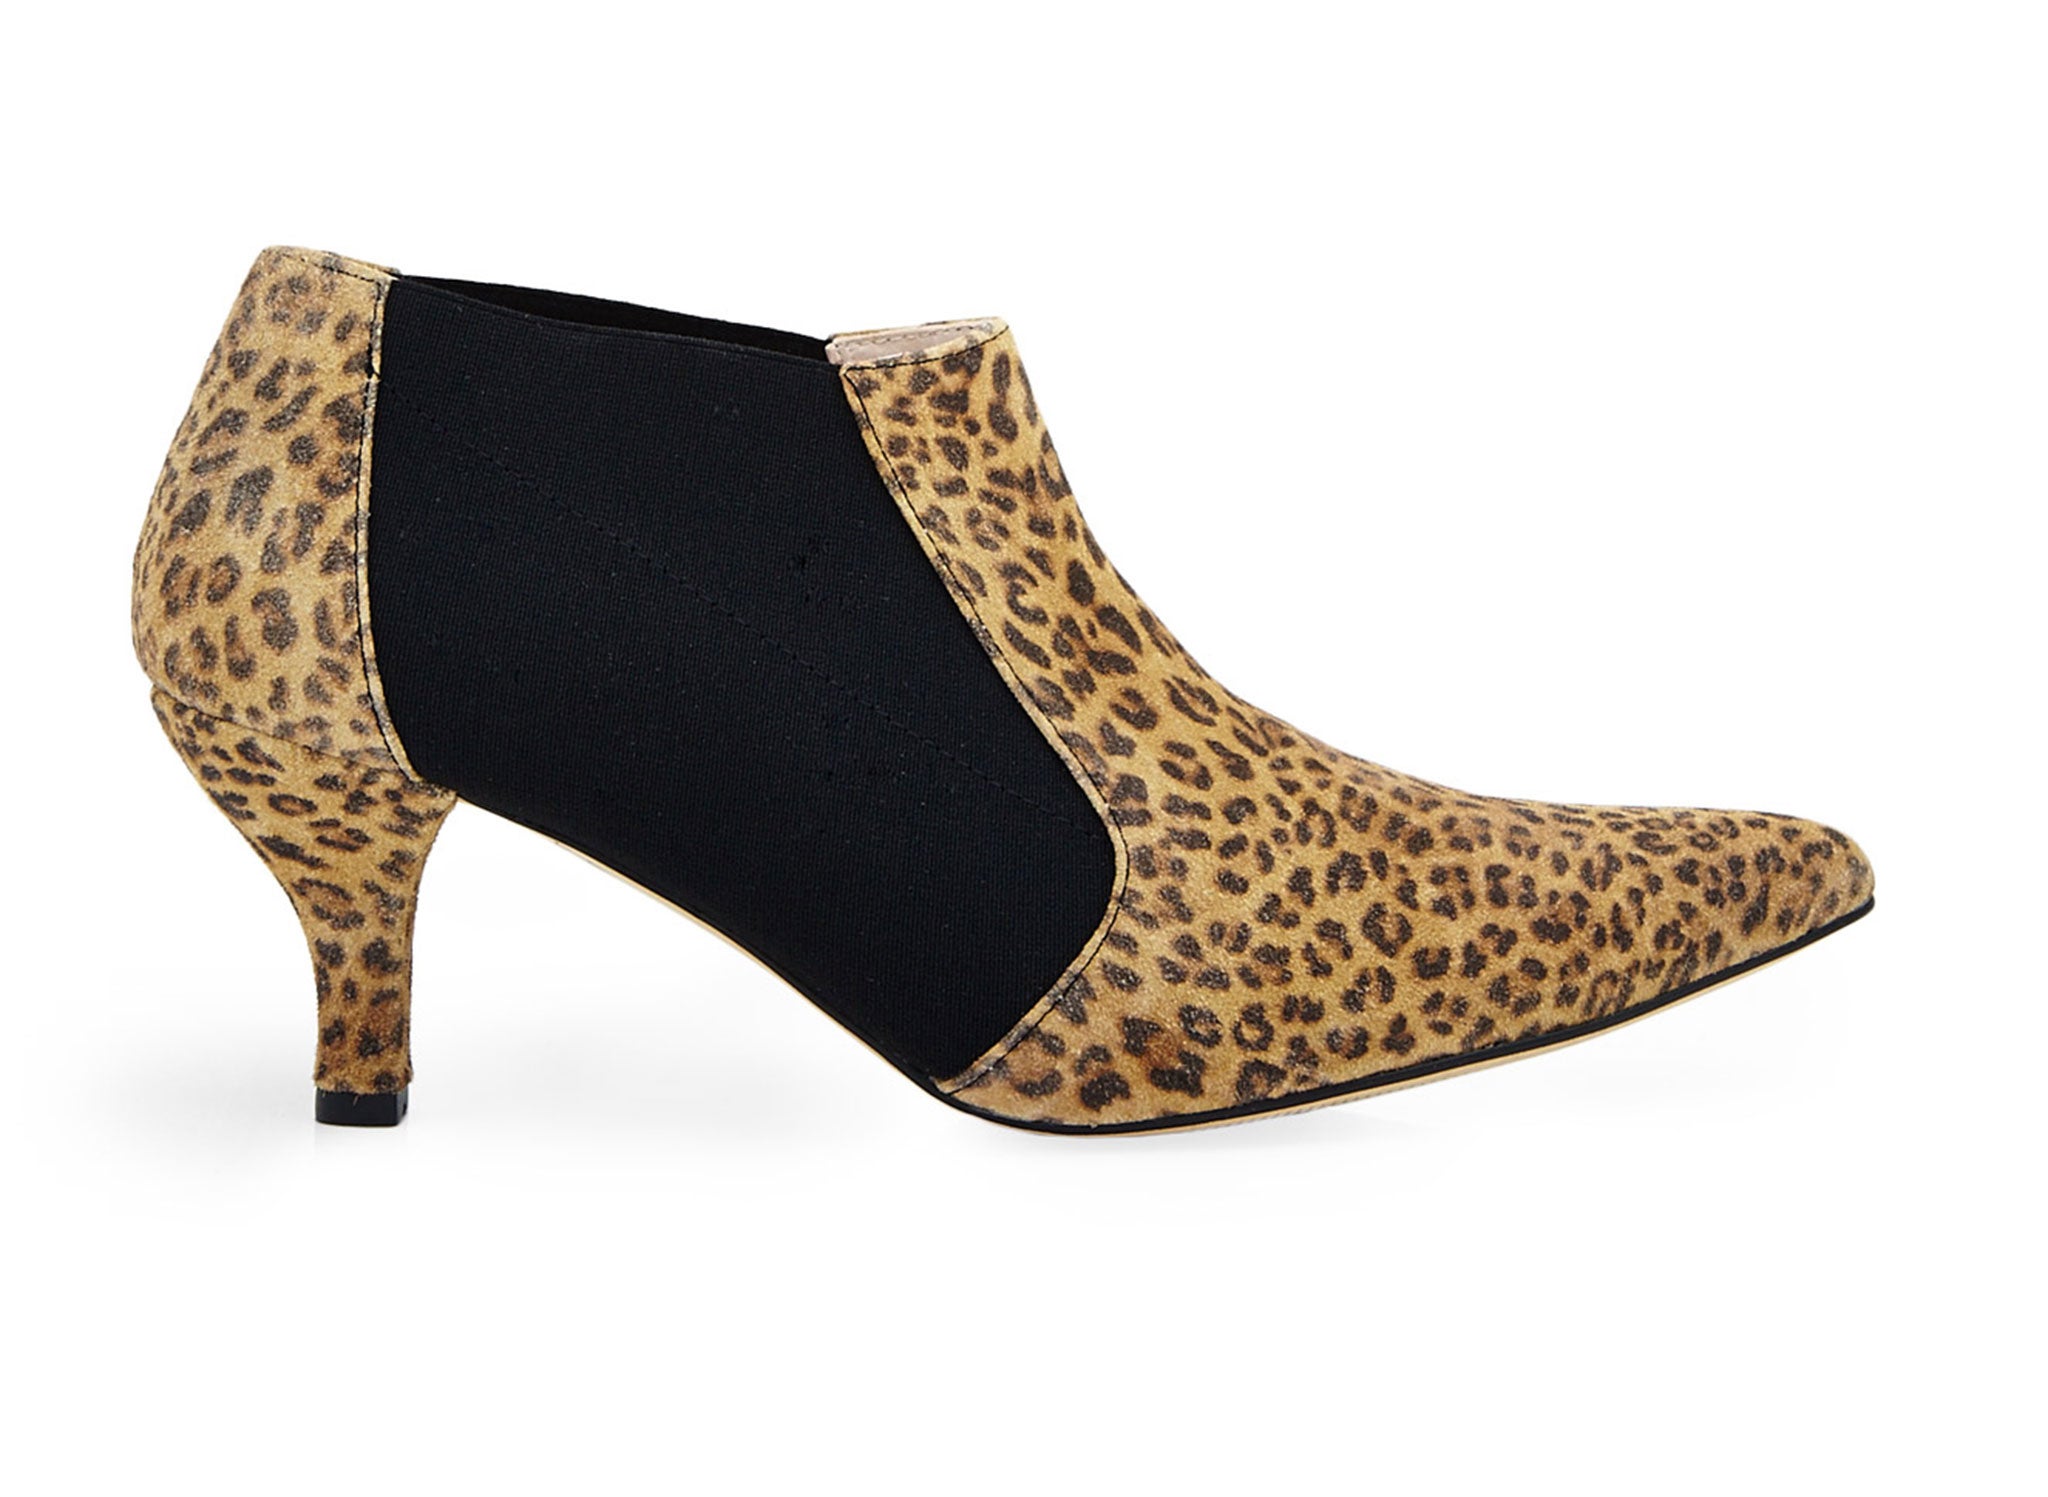 A low-slung pair such as these Marion pointed leopard-print ankle boots will do double duty with either short hemlines or skinny jeans